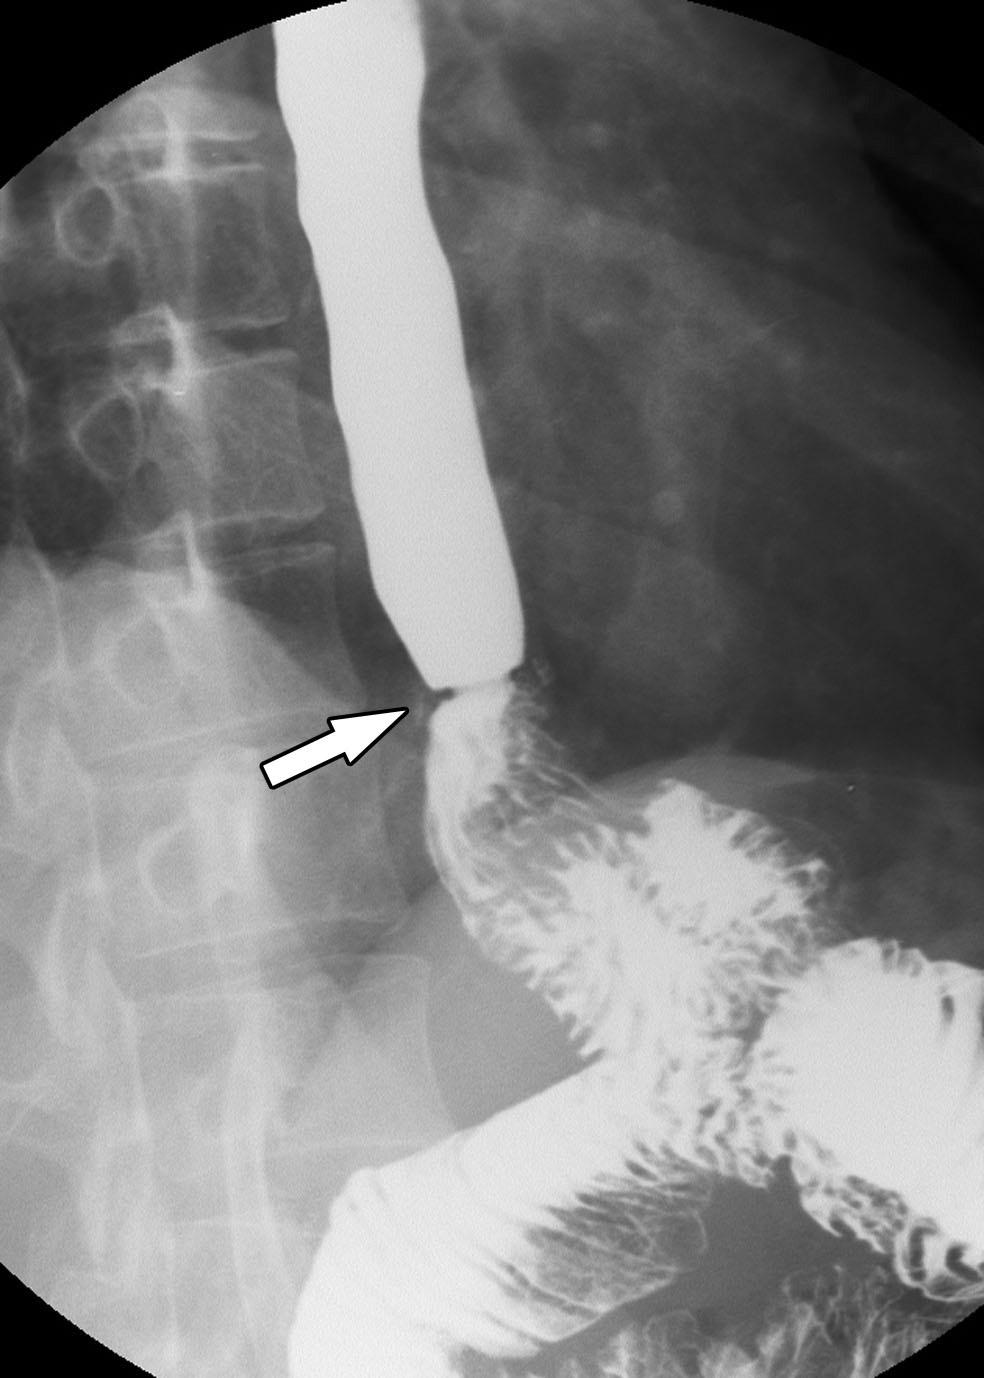 In another series (3), FG obstructive symptoms were relieved in 93% (27/29) of patients with strictures following surgical repair of esophageal atresia, during a mean follow-up period of